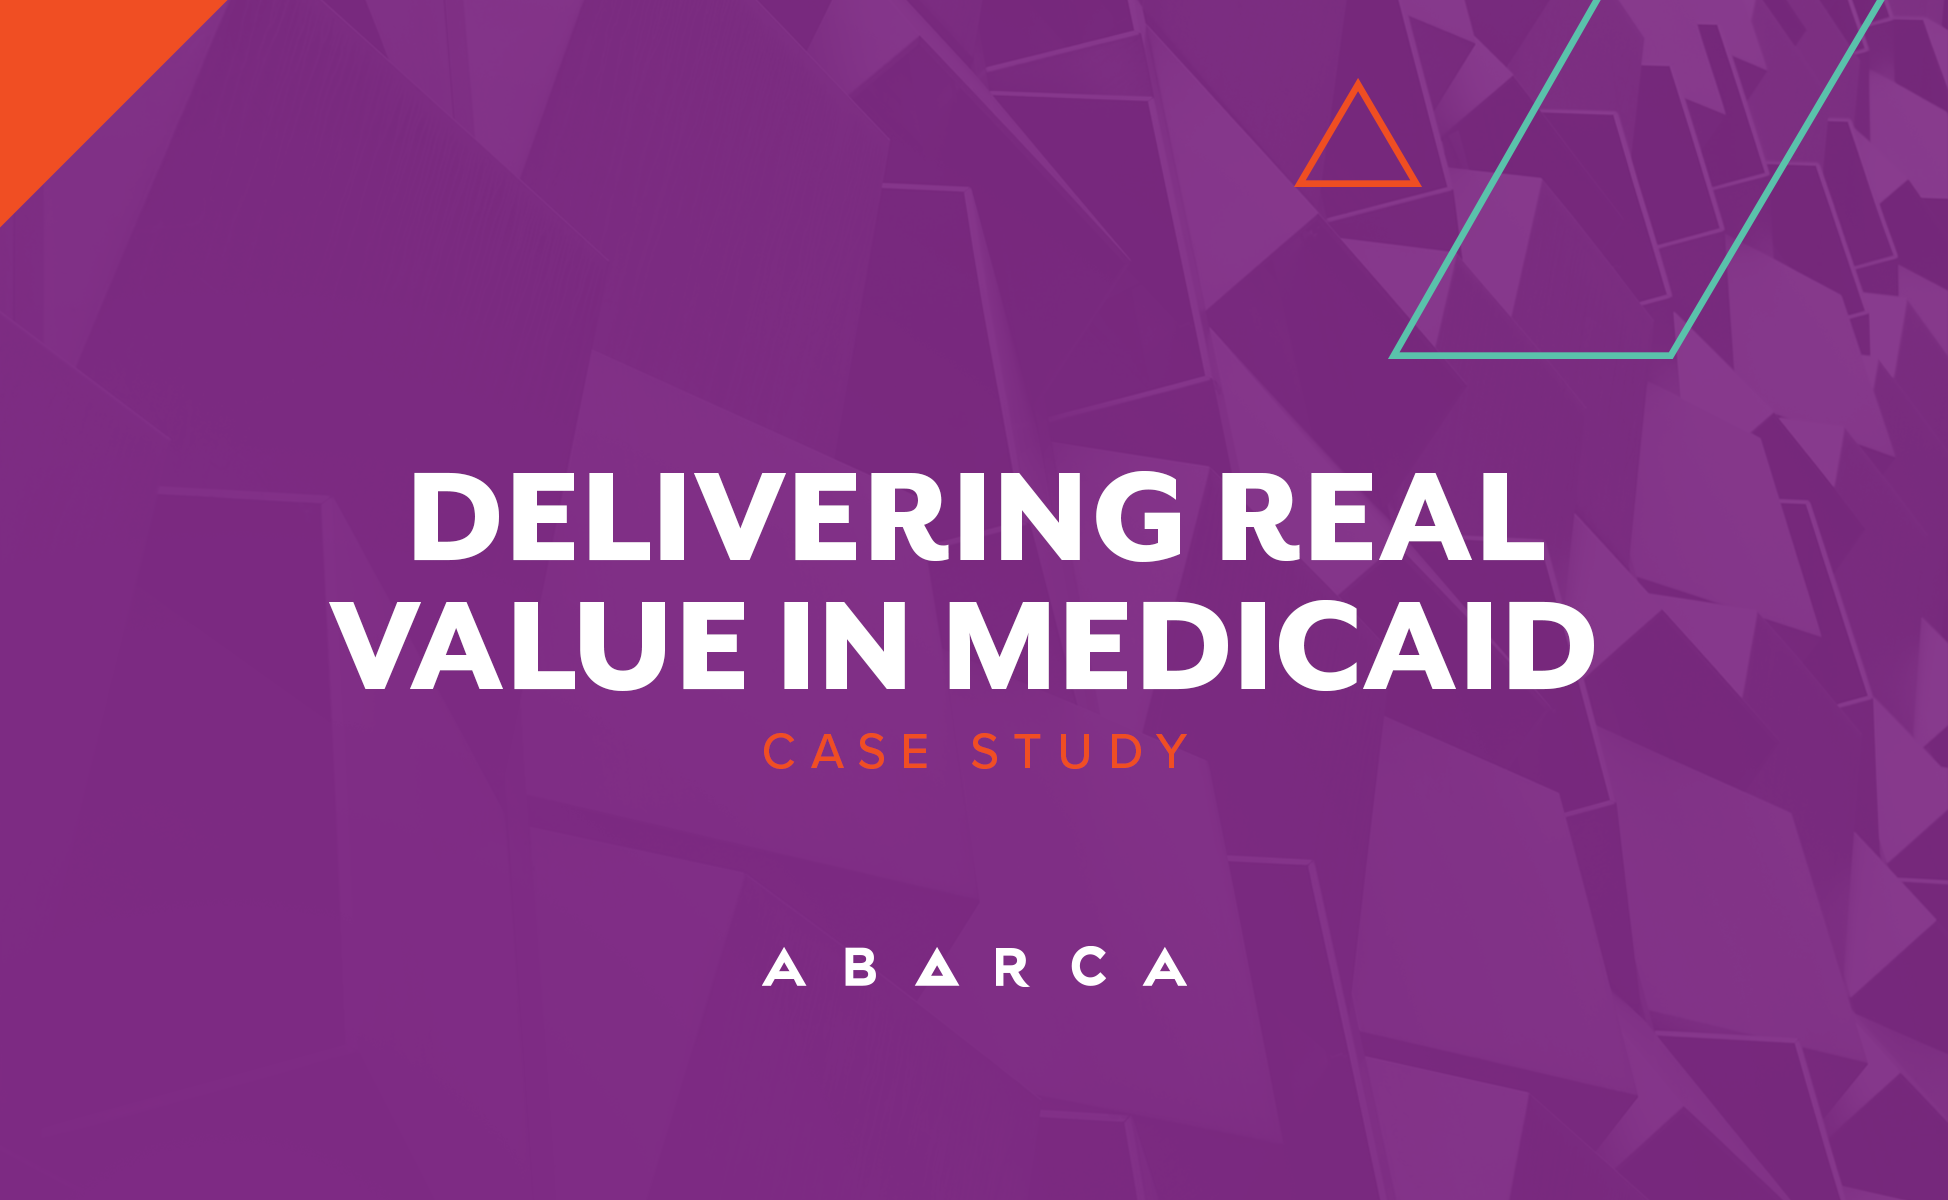 Abarca details first value-based agreement for Medicaid members prescribed Biogen products